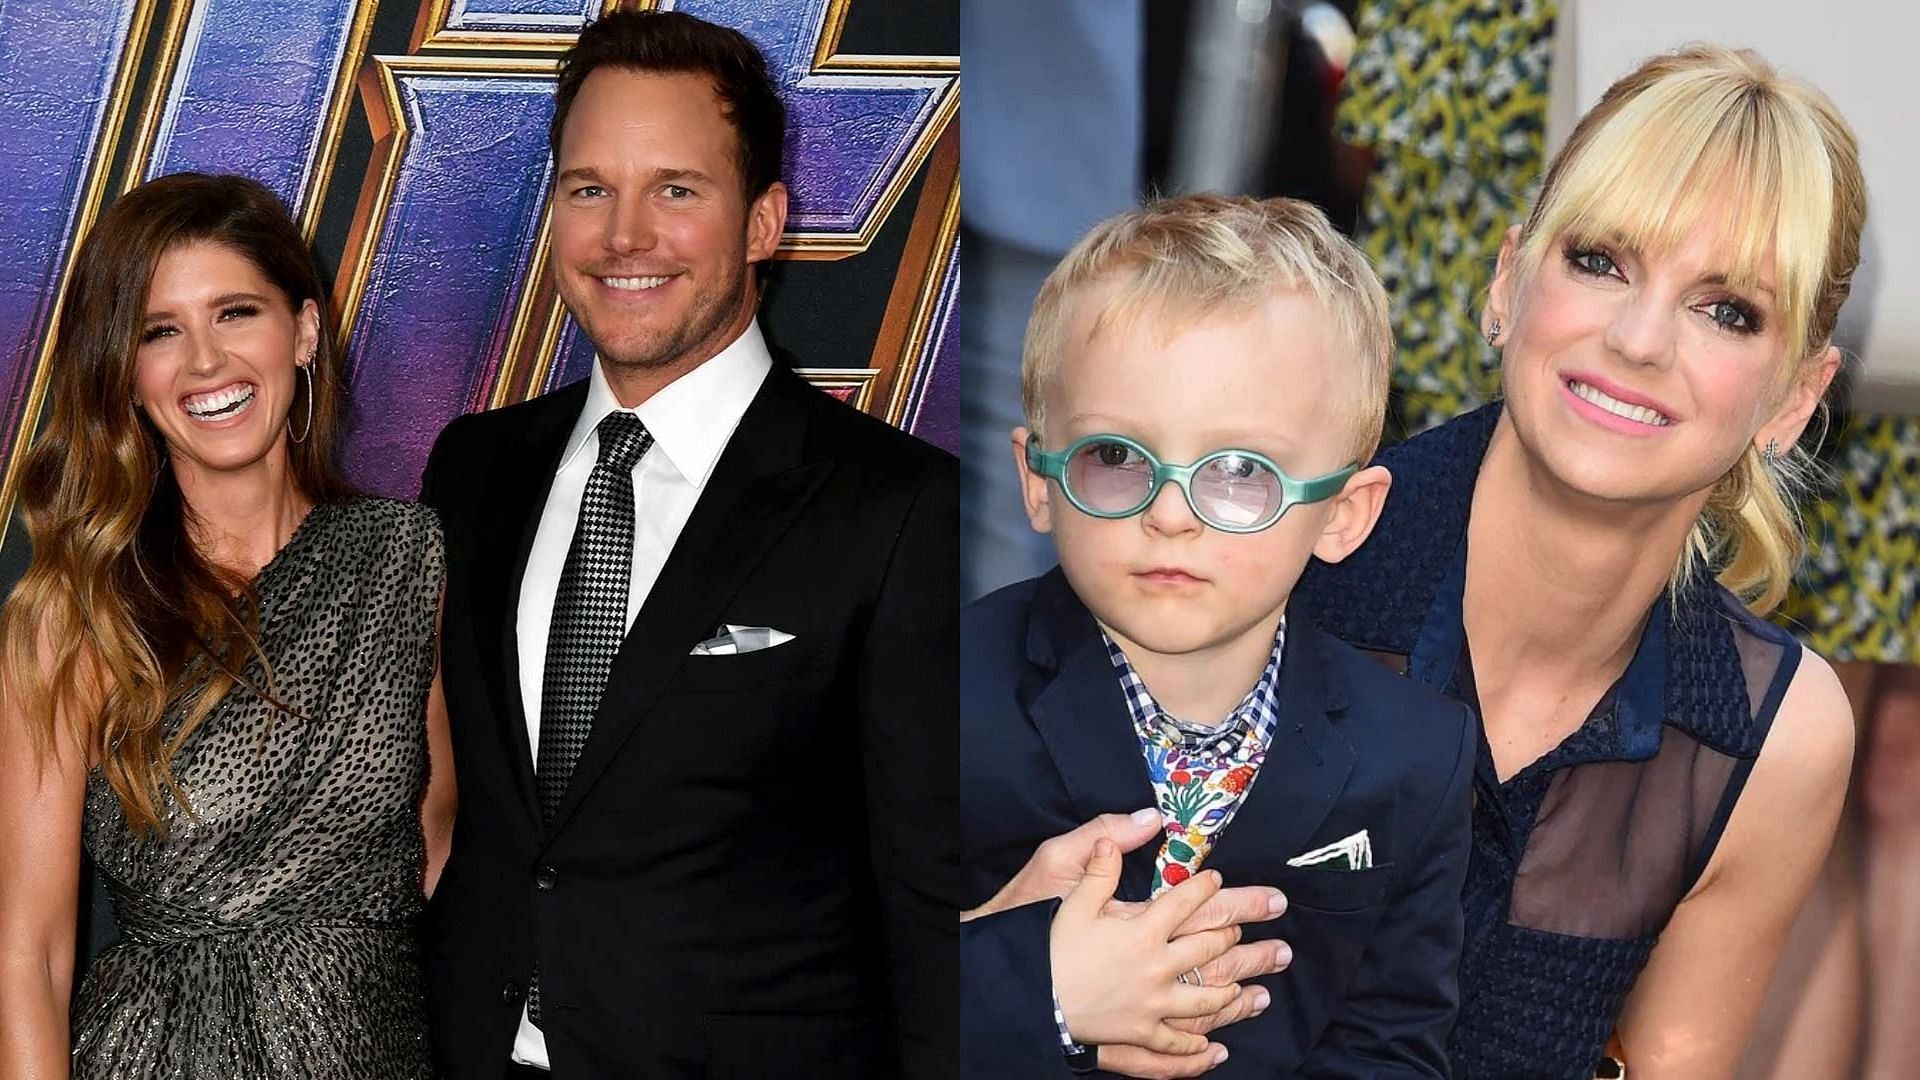 Chris Pratt has been slammed for allegedly shading his first child with Anna Faris while praising his daughter with Katherine Schwarzenegger (Image via Getty Images)